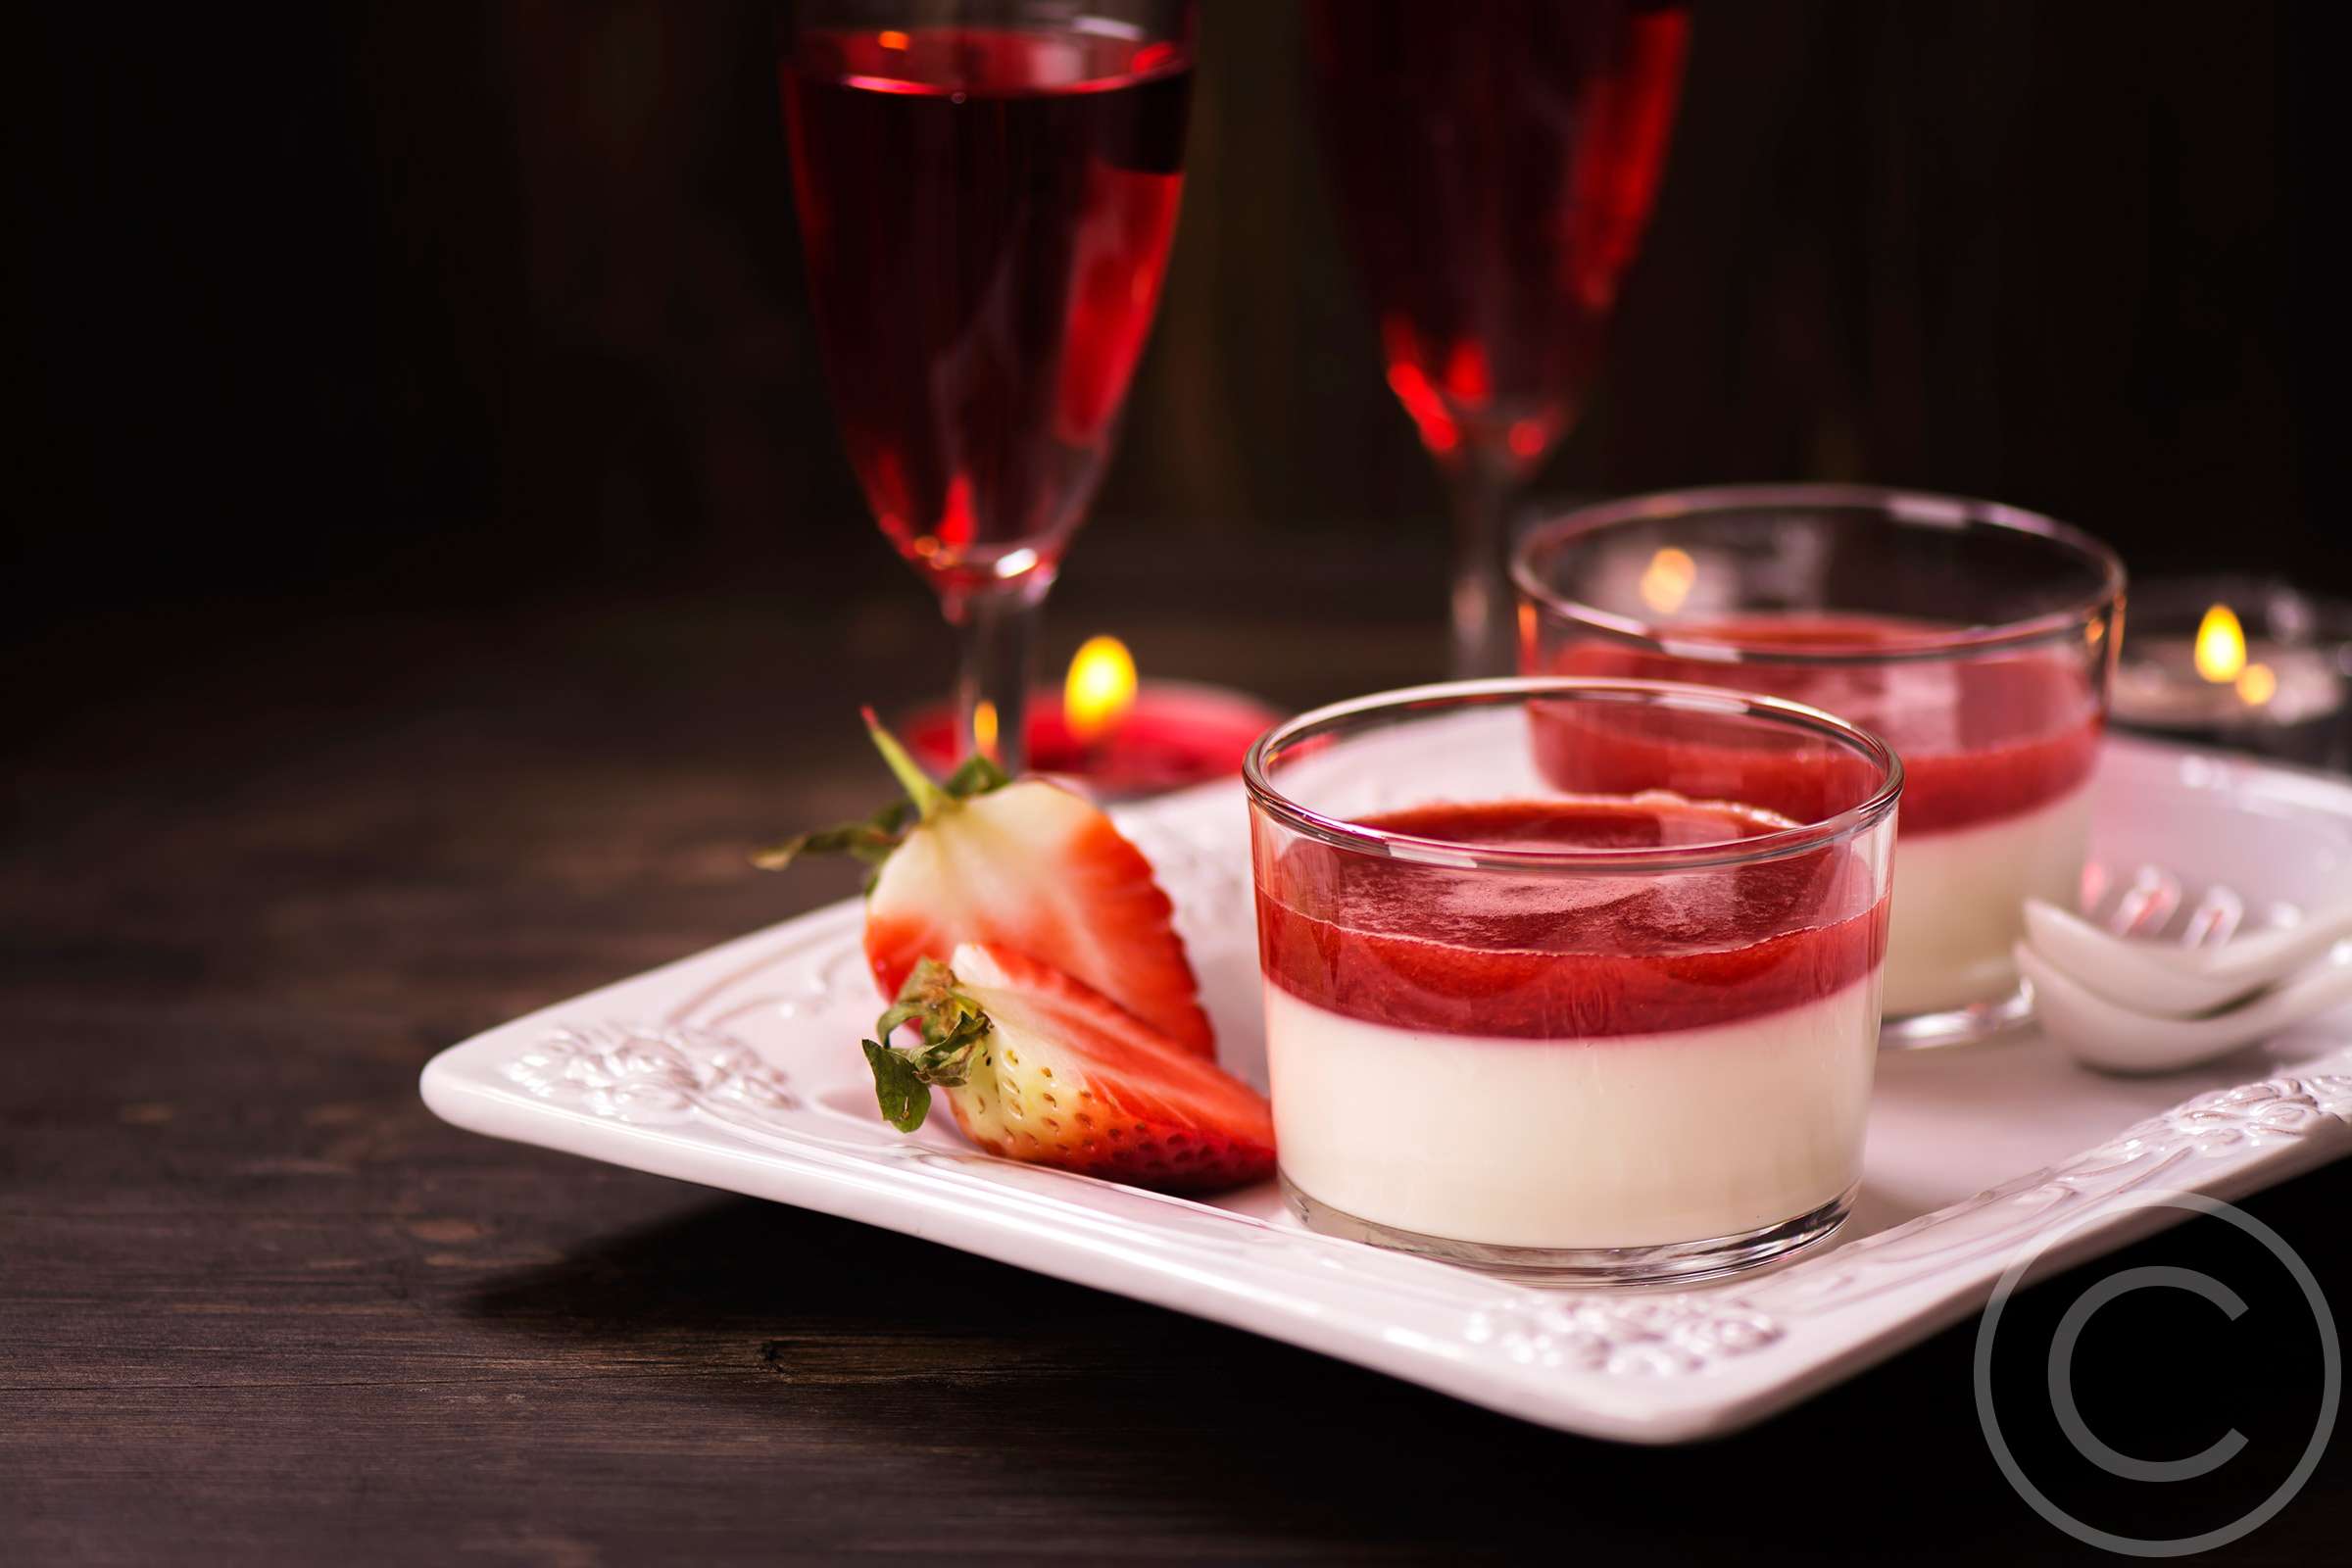 A white plate topped with strawberry cheesecake next to two glasses.